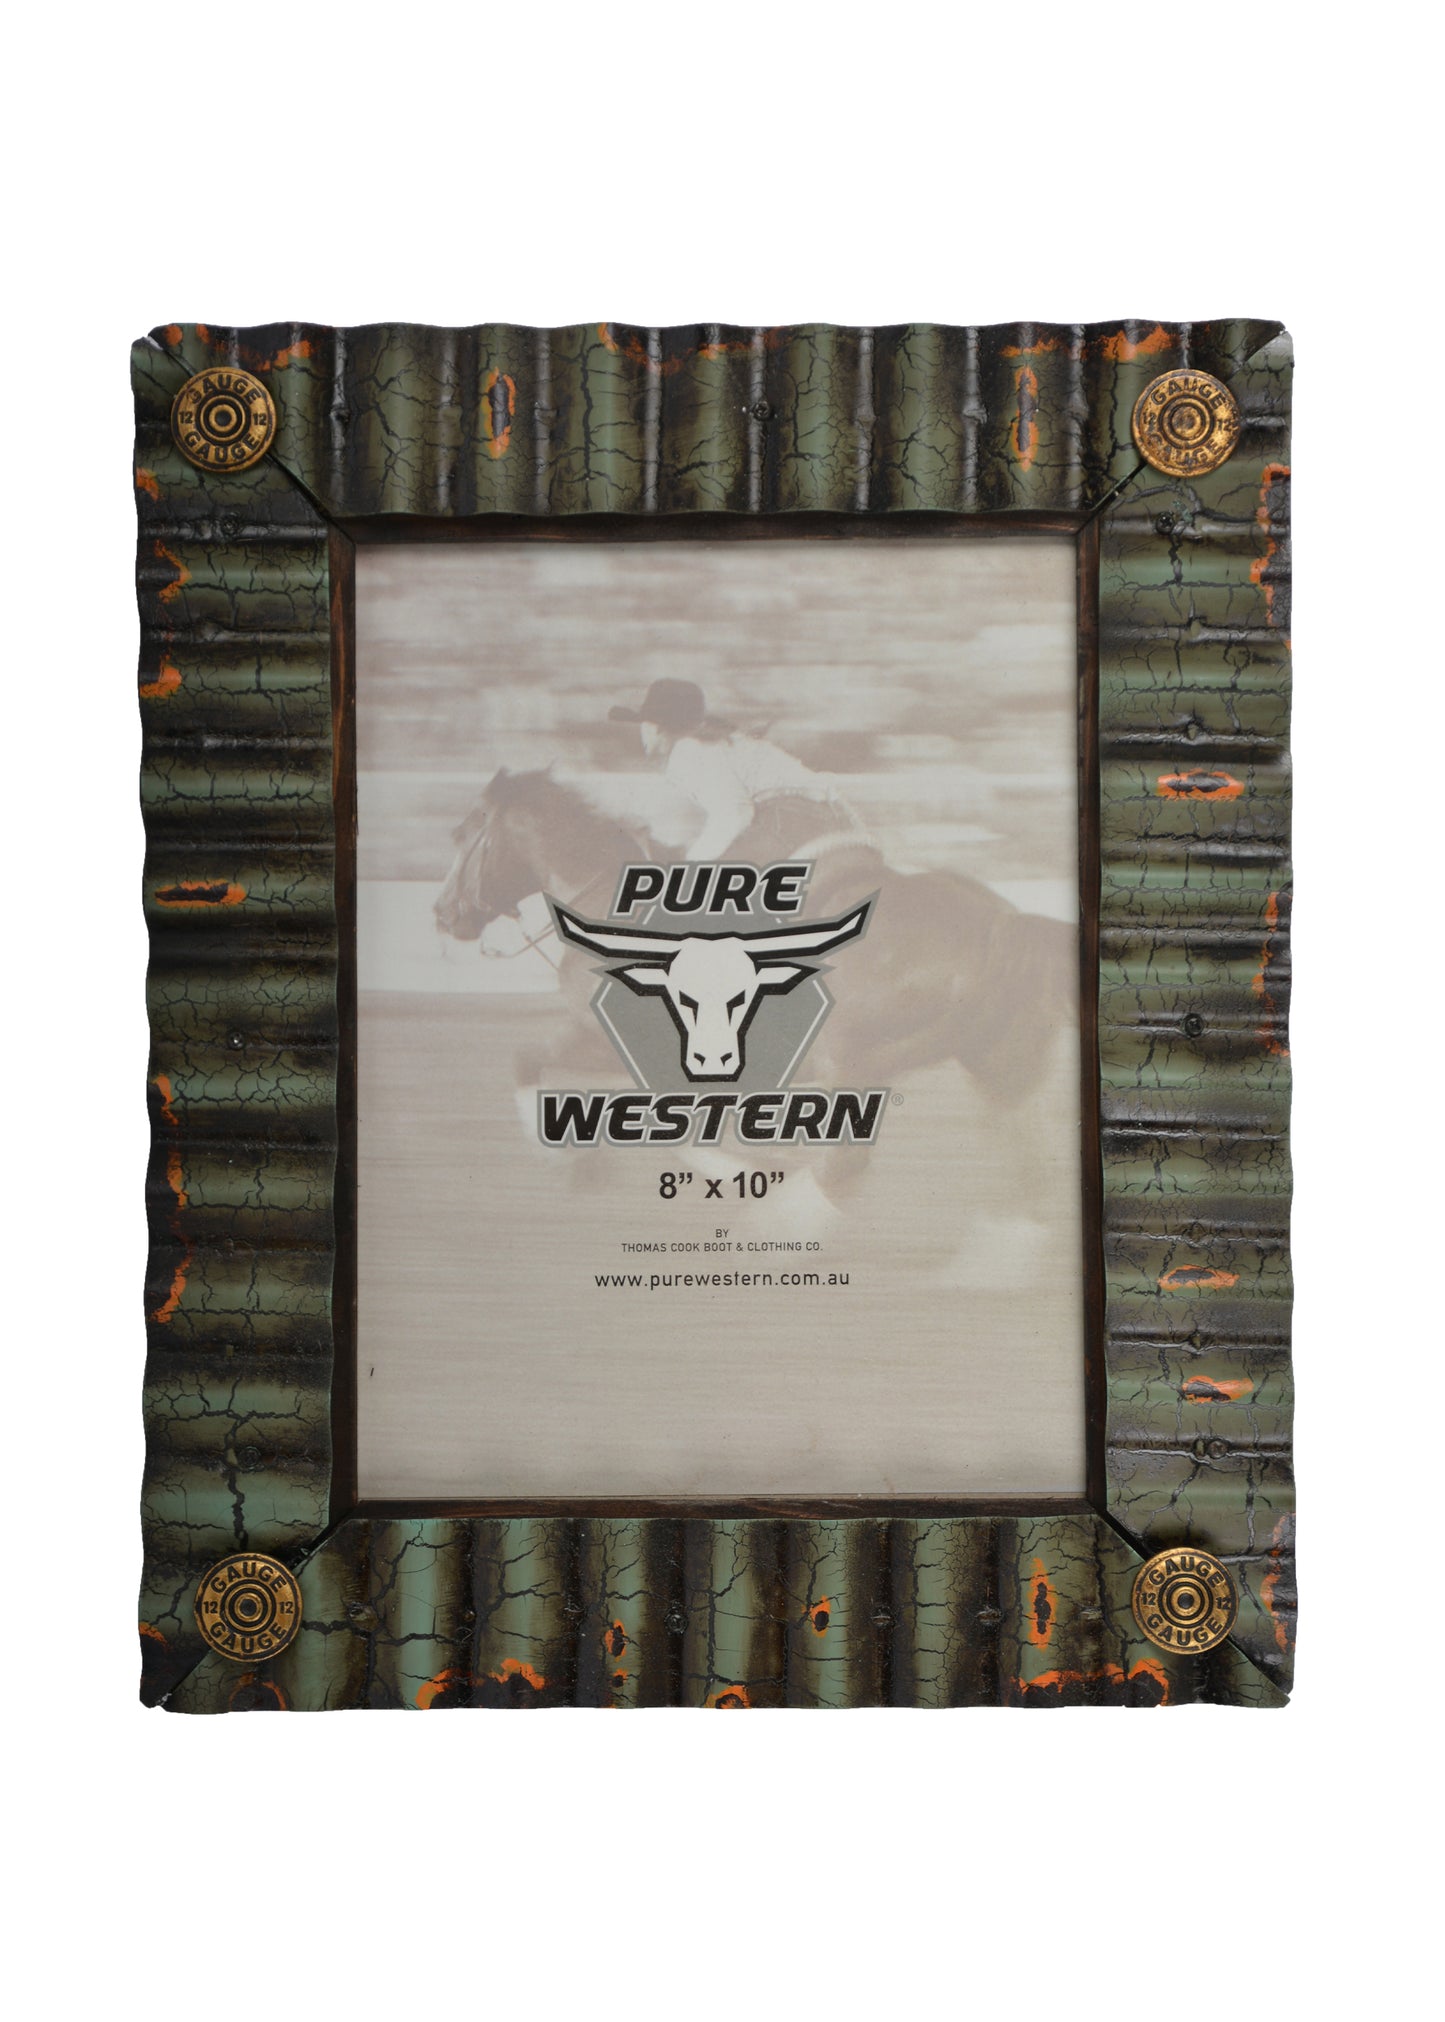 Pure Western Shotgun Shell Corrugated Iron  Picture Frame 8 x 10"